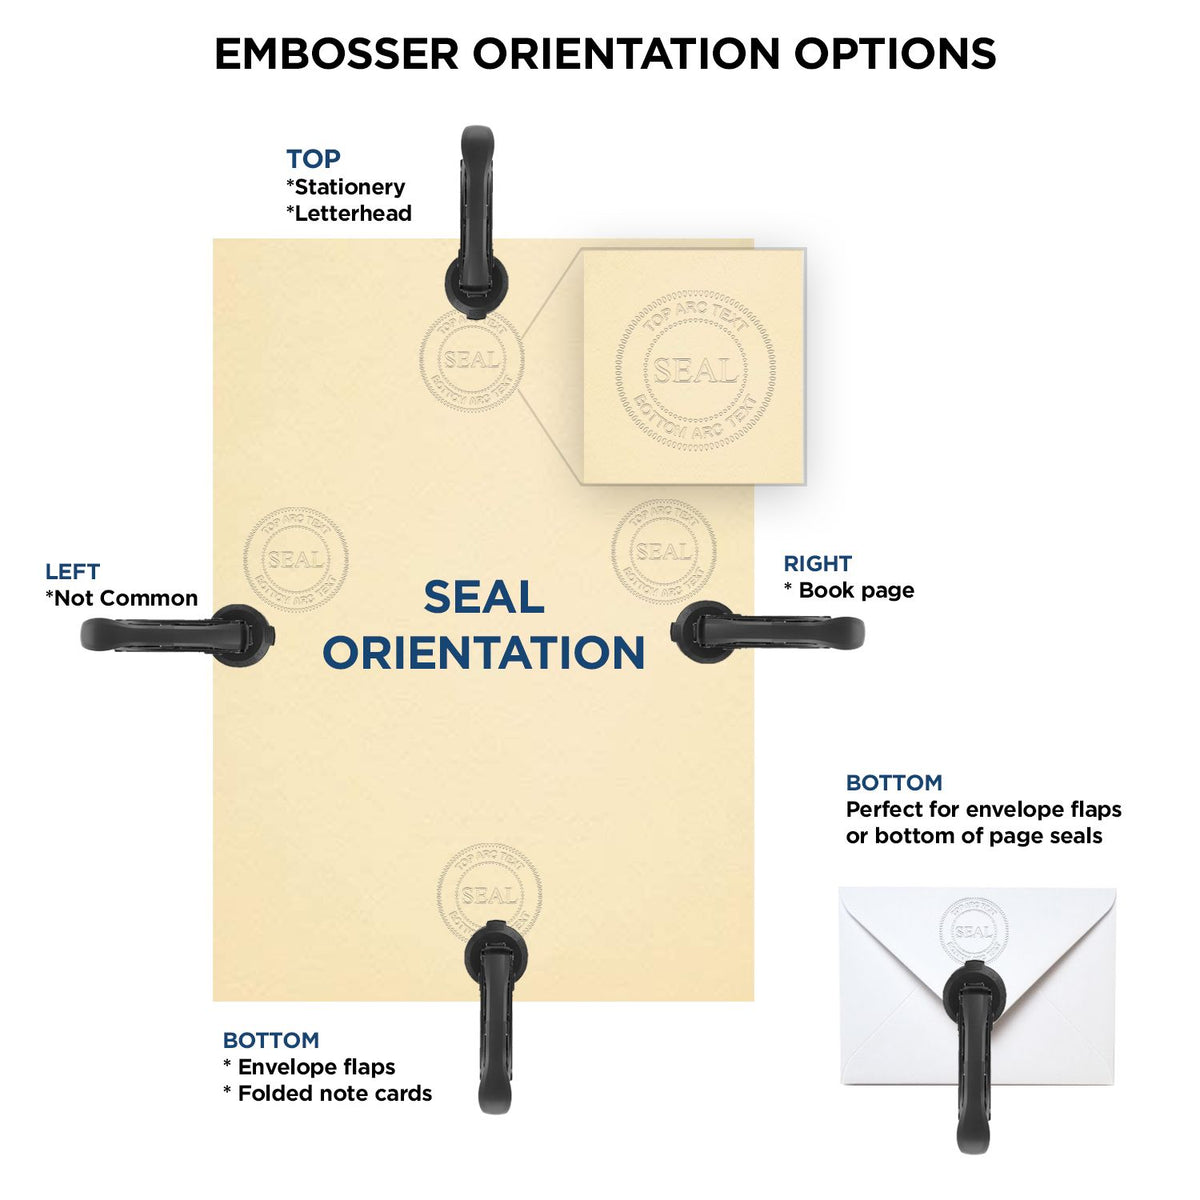 An infographic for the Hybrid Kansas Land Surveyor Seal showing embosser orientation, this is showing examples of a top, bottom, right and left insert.